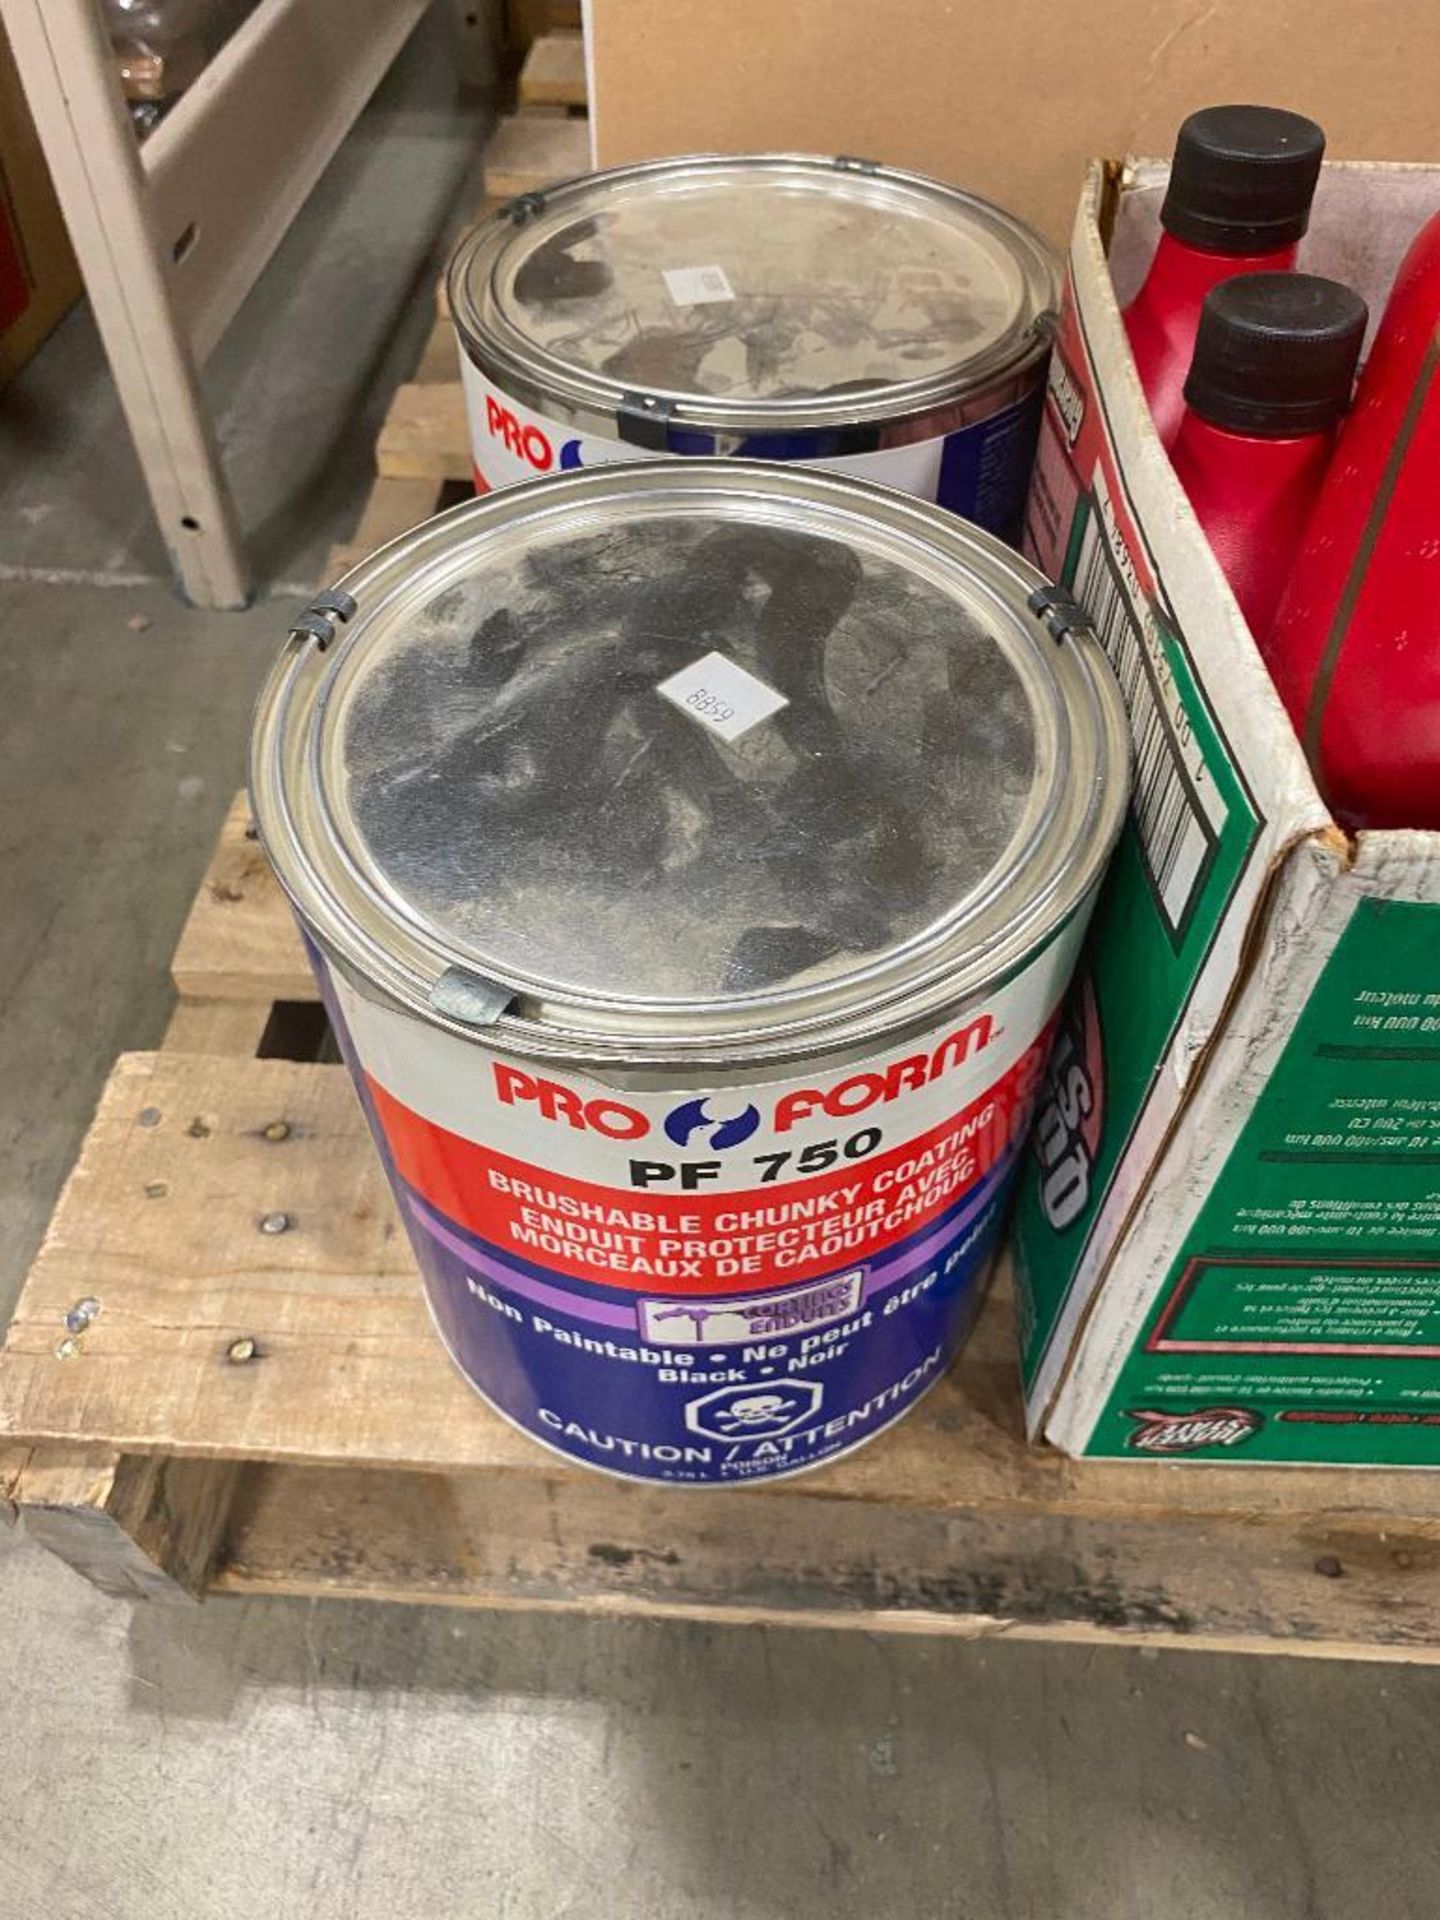 Pallet of Asst. Fluids including 5W-30 Oil, SAE 10W Oil, 15W-40 Oil, Brushable Chunky Coating, etc. - Image 4 of 4